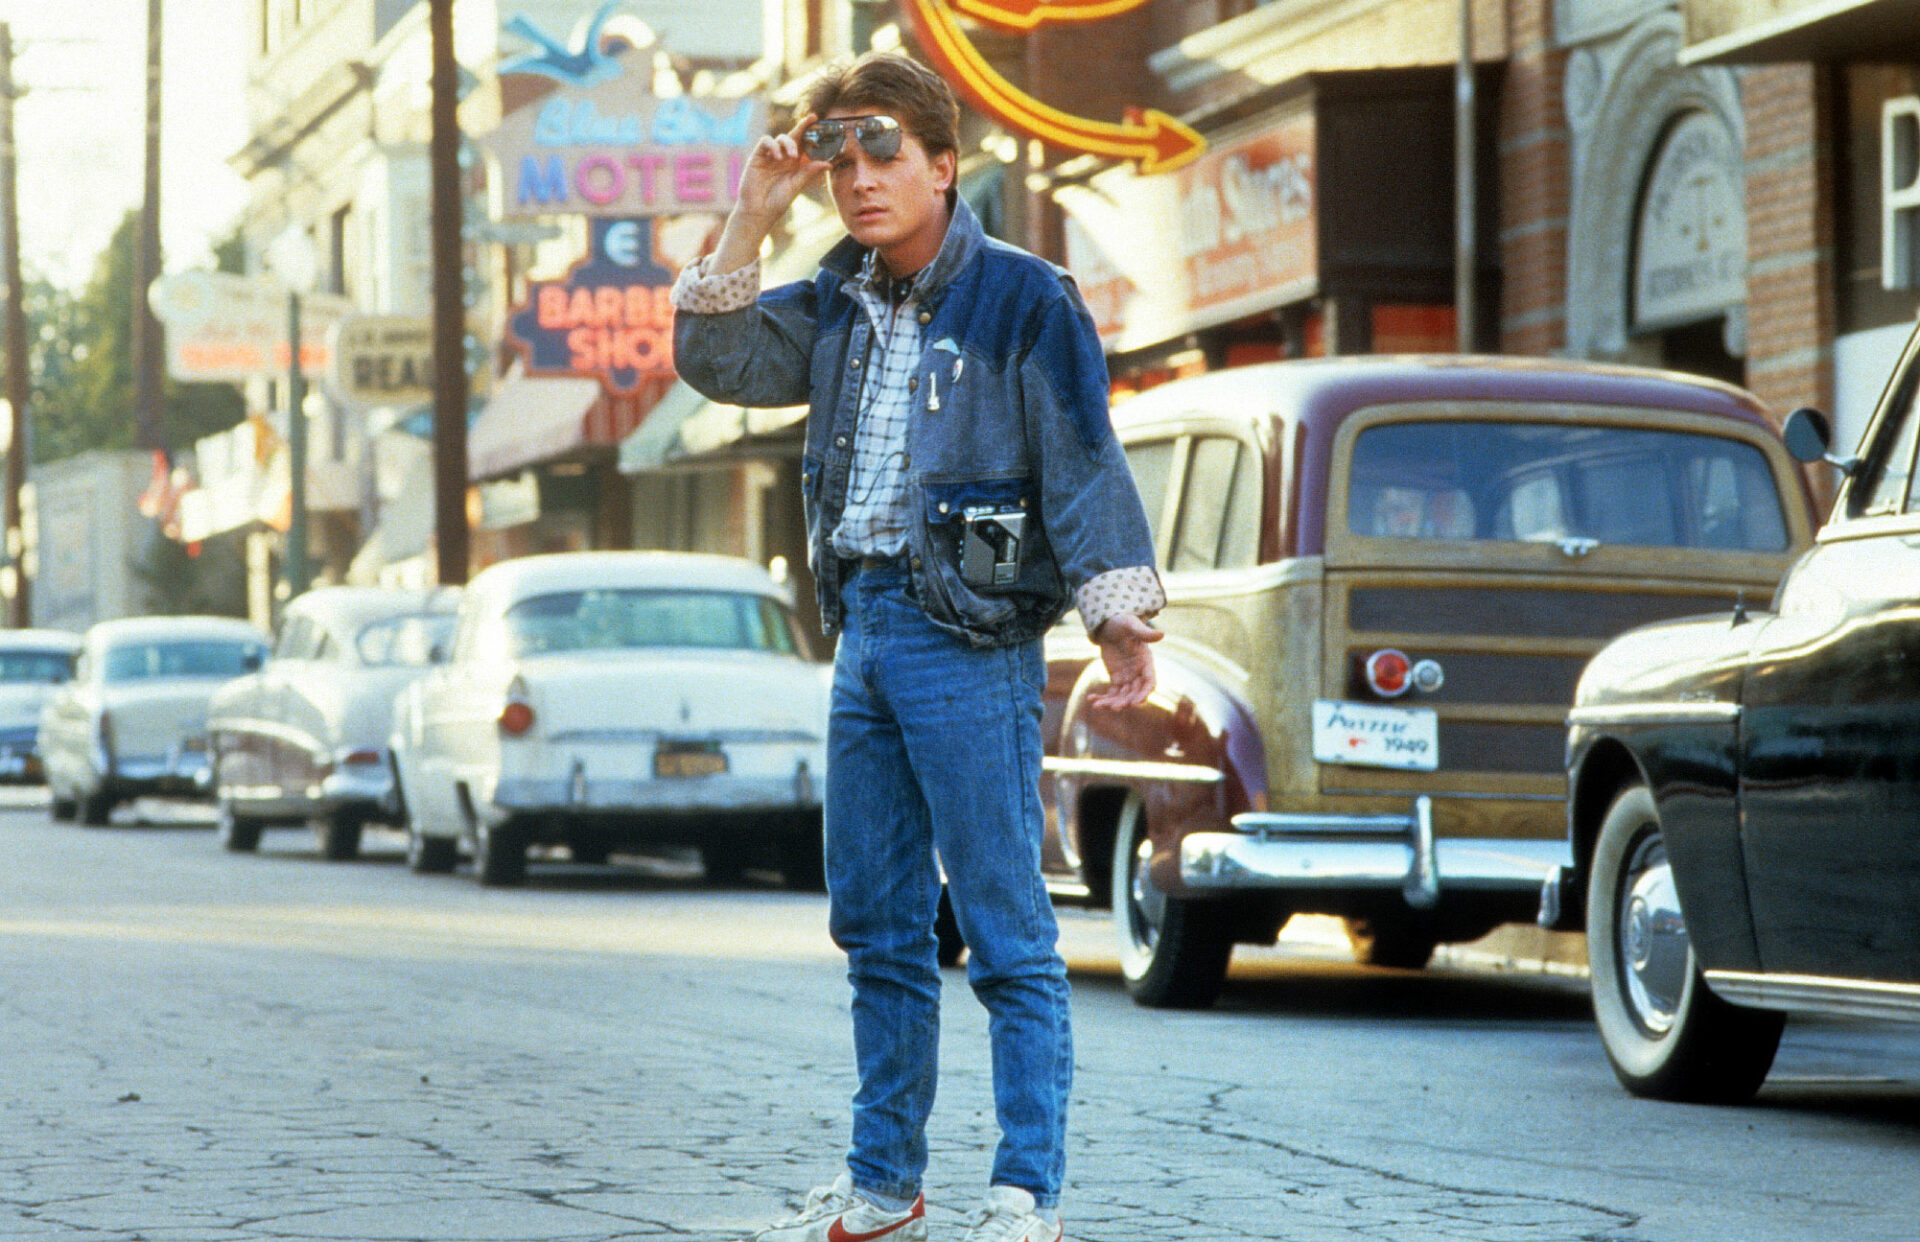 Michael J Fox walking across the street in a scene from the film 'Back To The Future', 1985. (Photo by Universal/Getty Images)